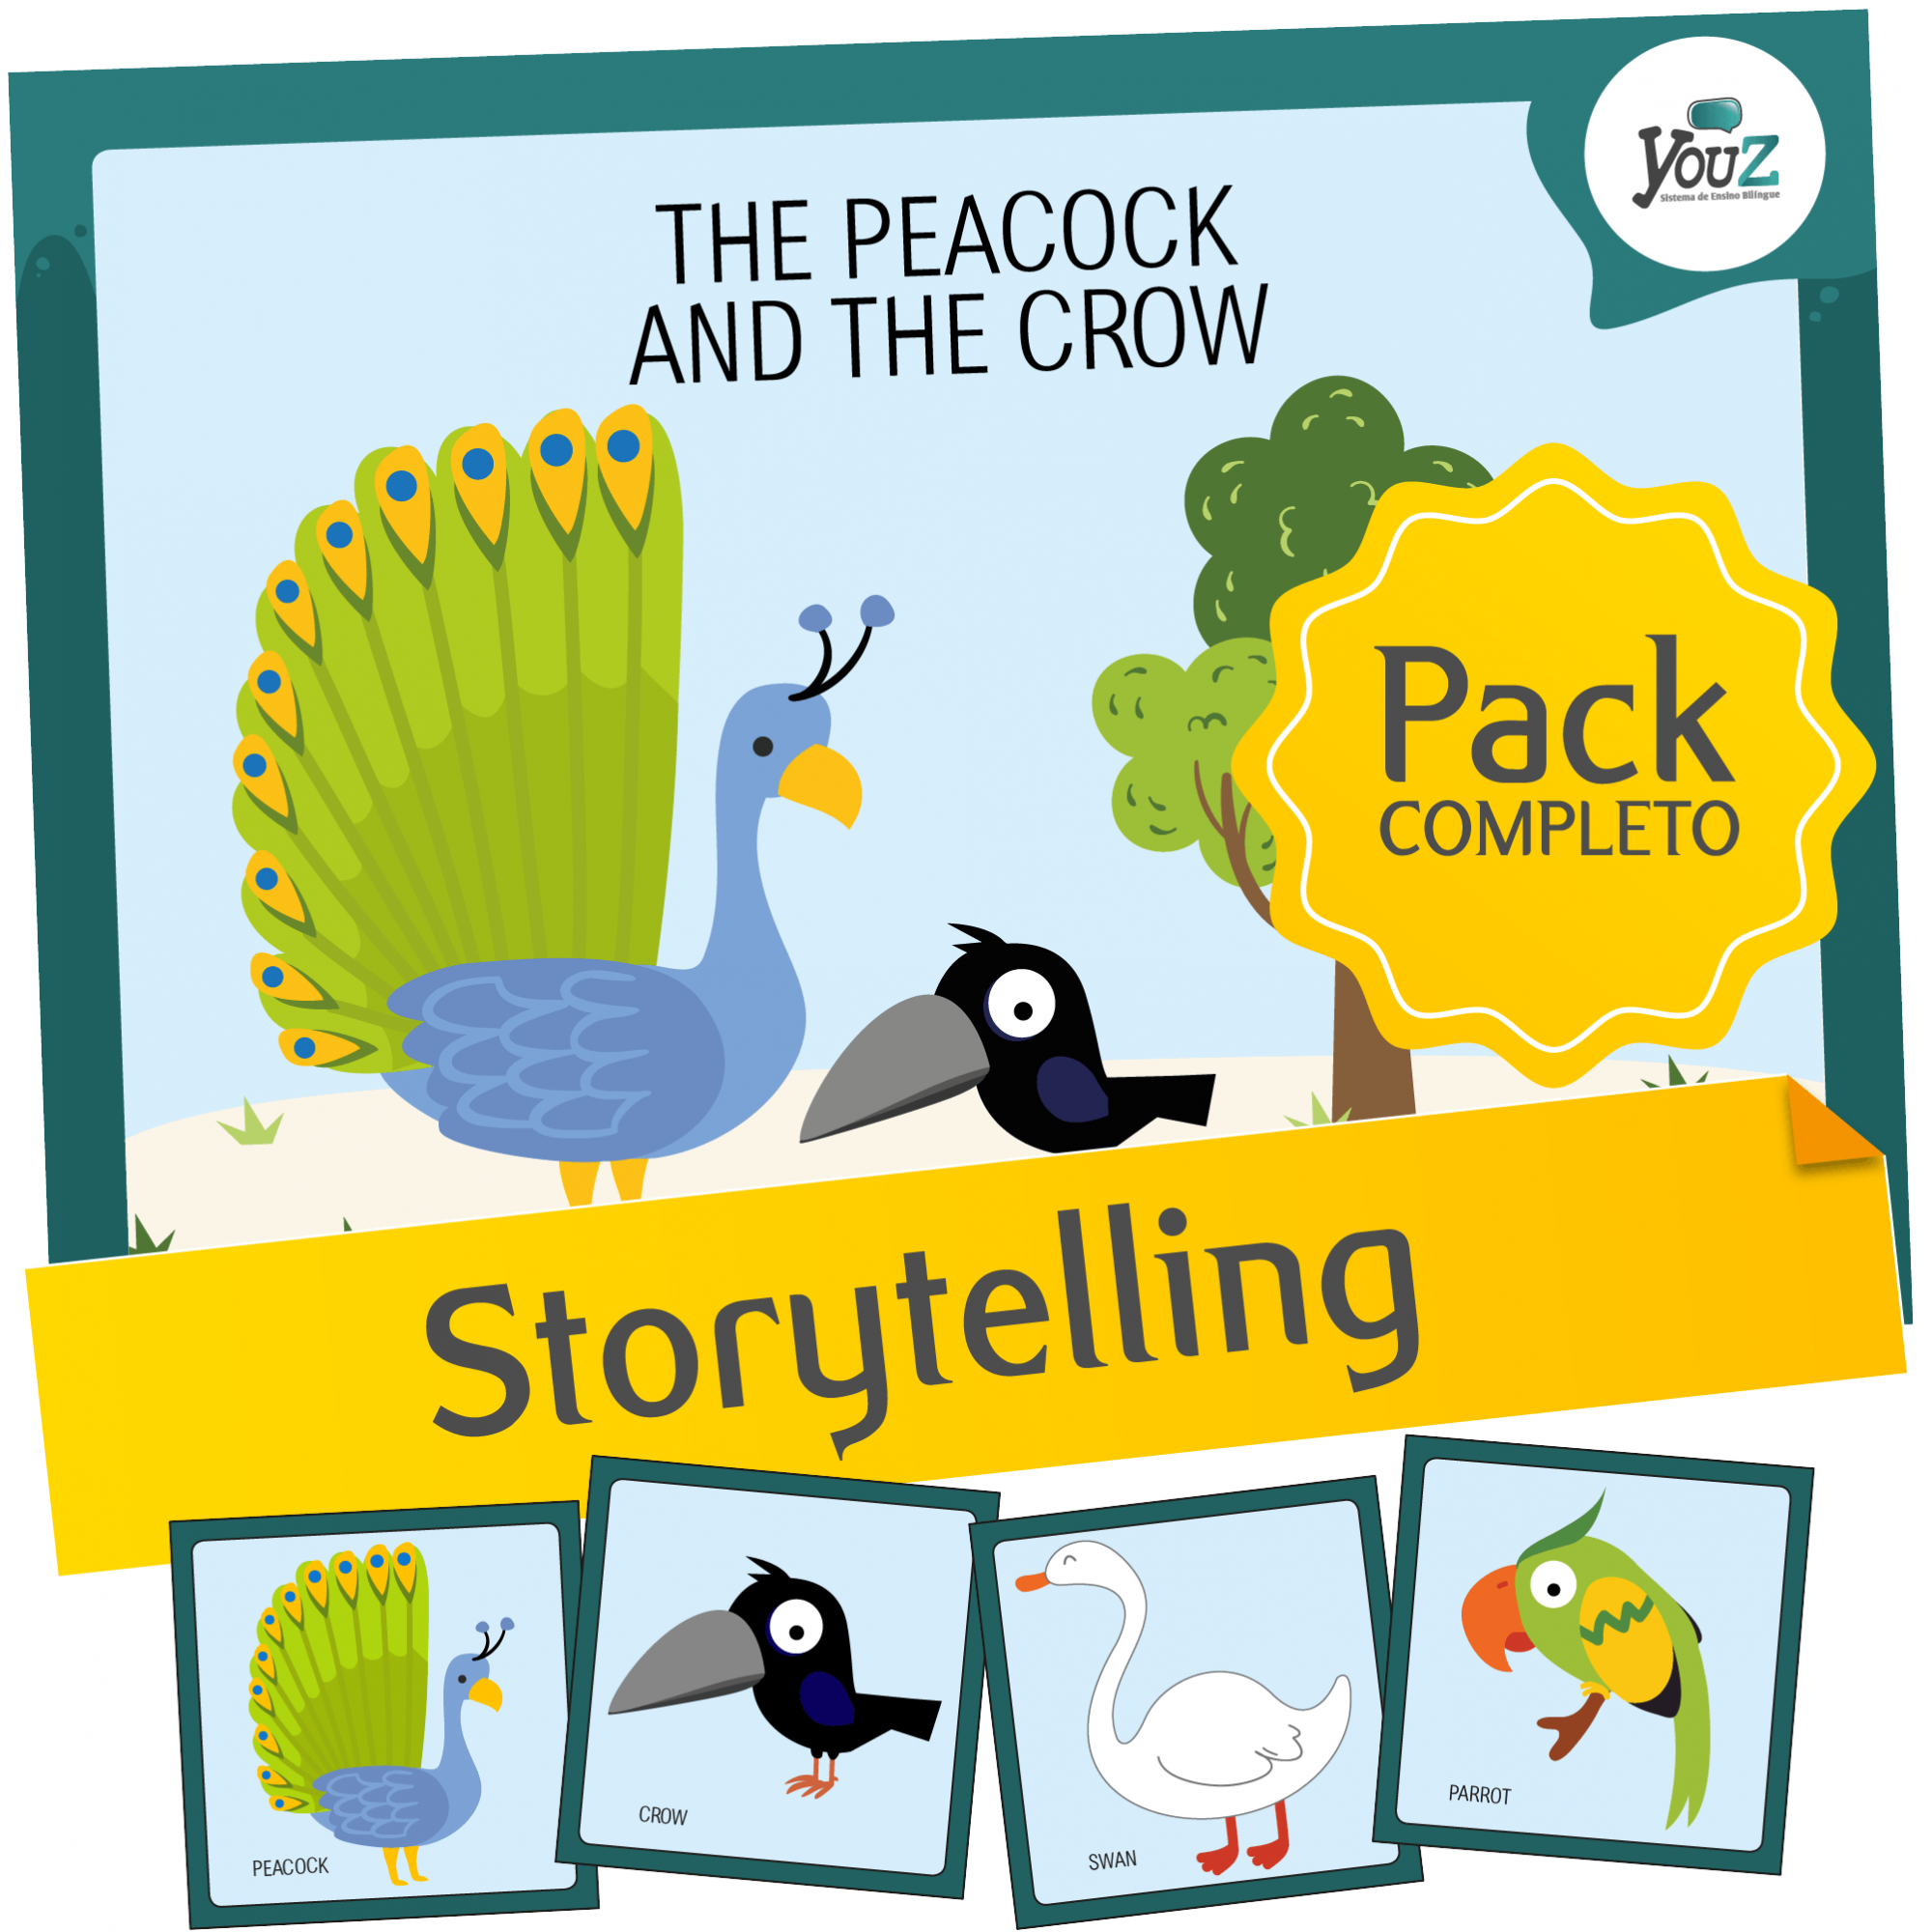 The Peacock and the Crow - Storytelling activities